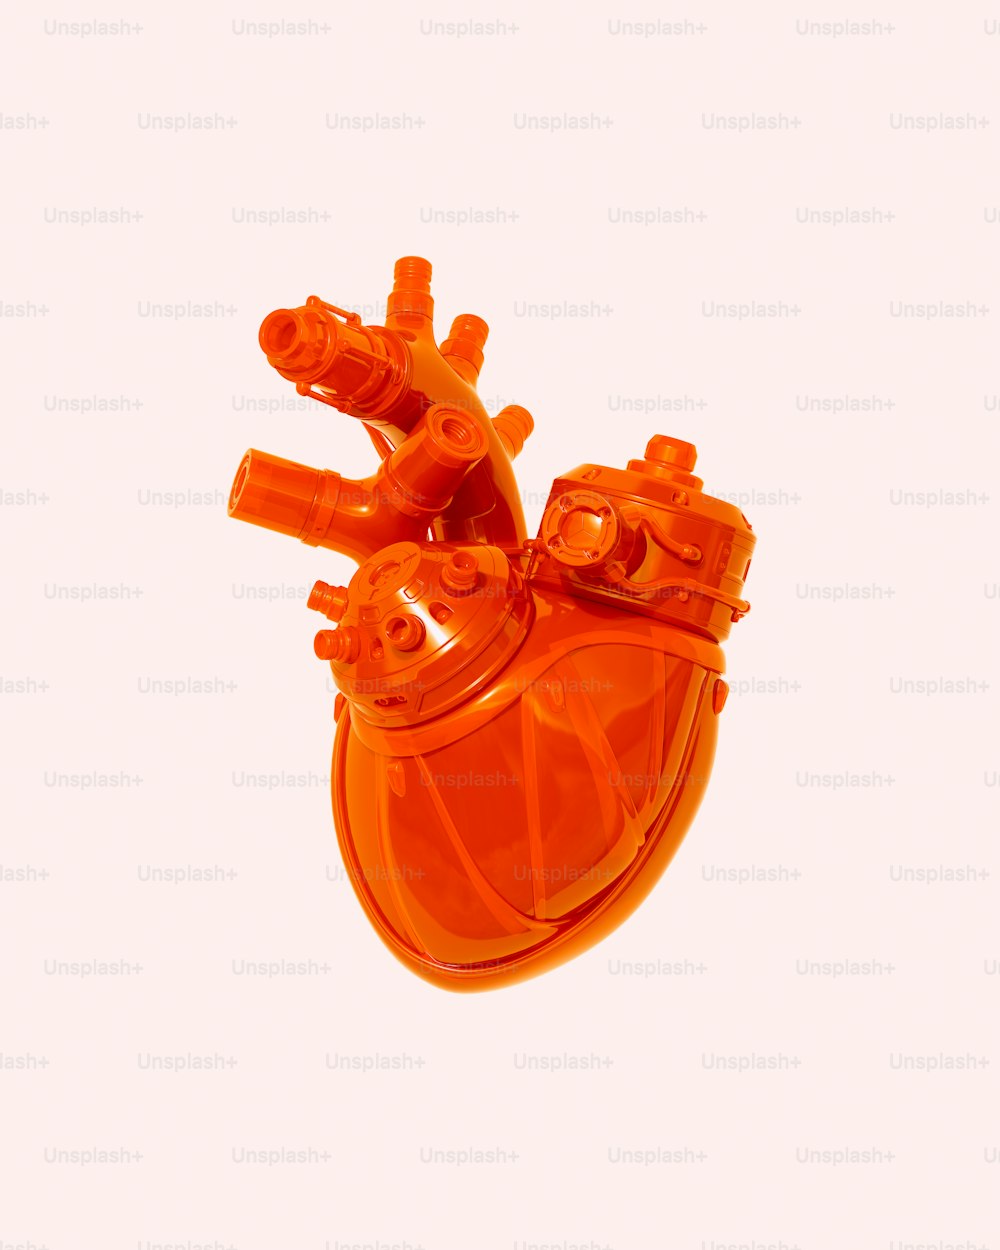 a close up of an orange heart shaped object